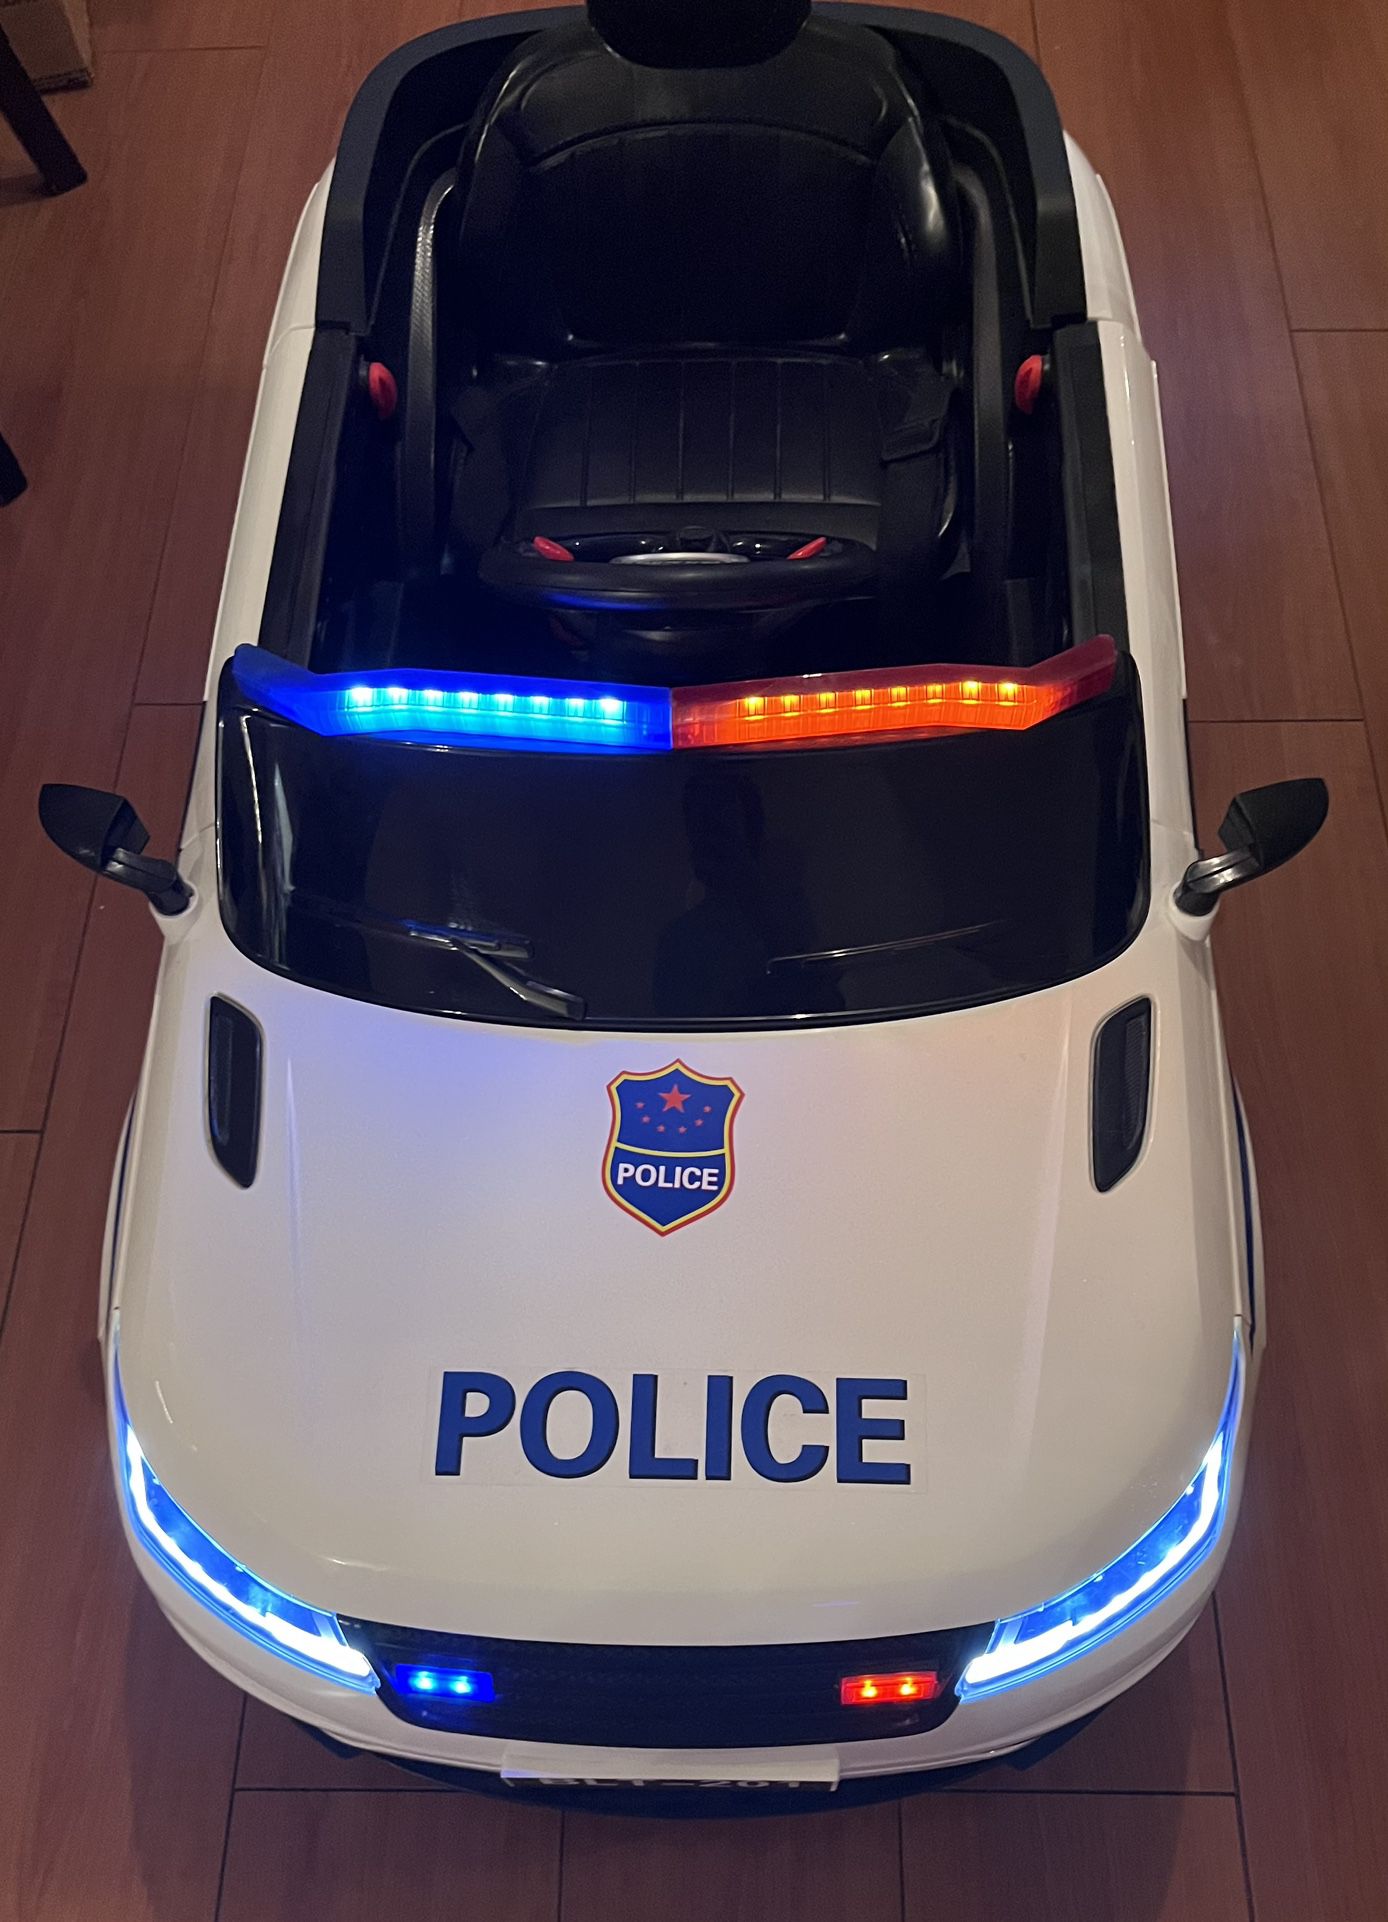 911 Electric Police car For Toddler Or Small Kids. Read